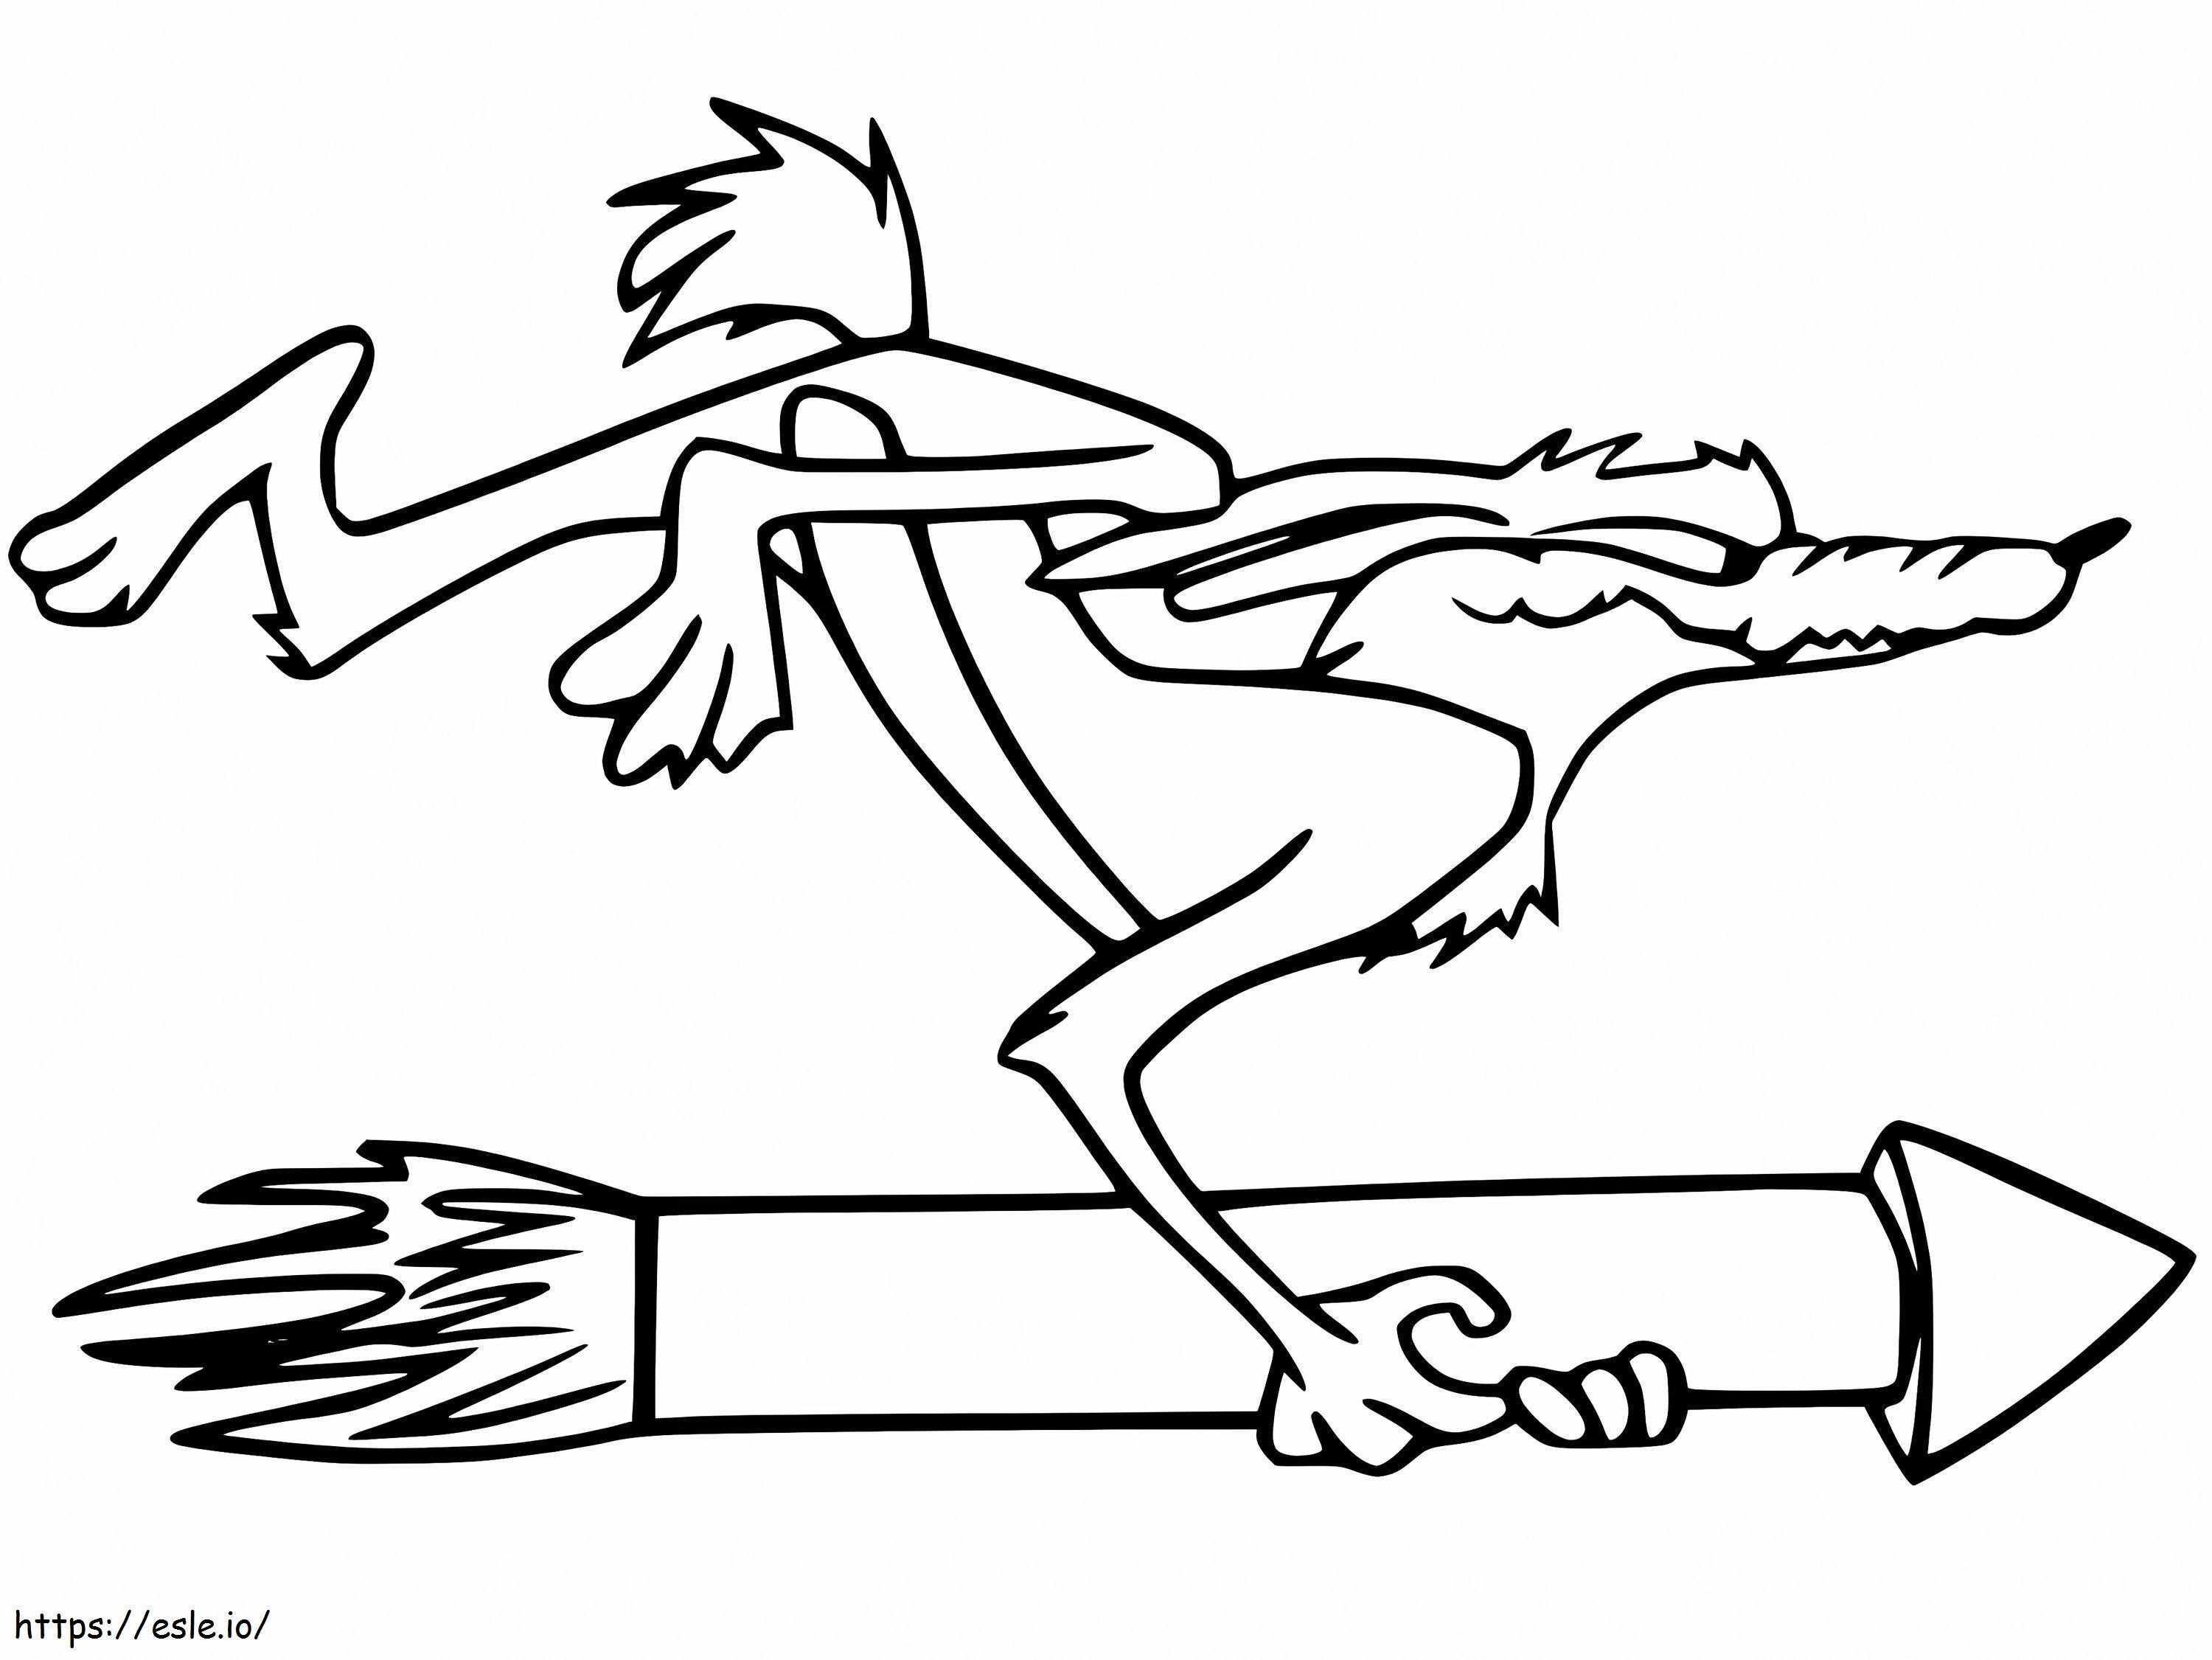 Wile E Coyote With Rocket coloring page